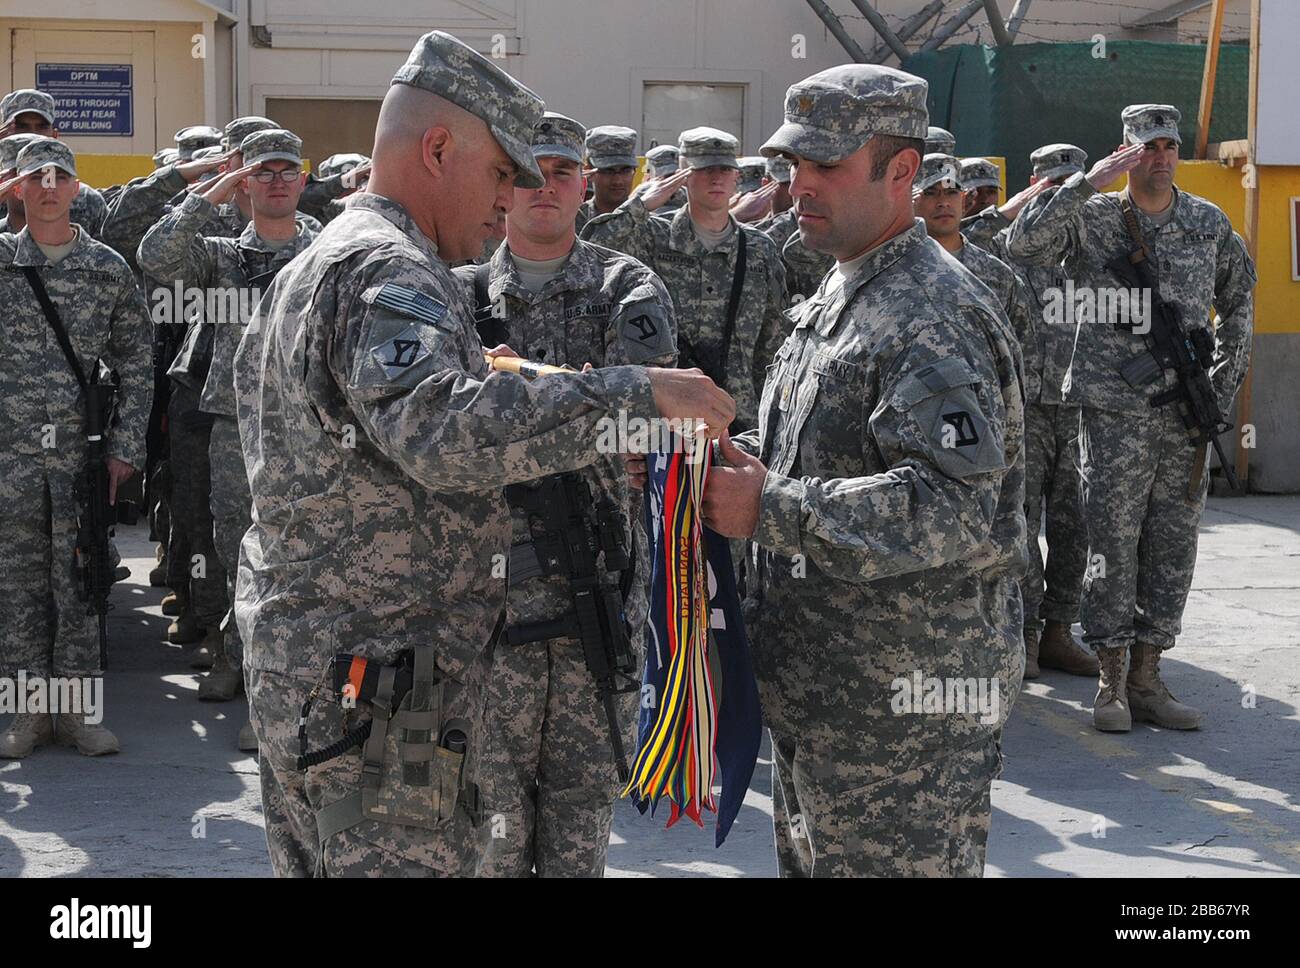 'English: Maj. Timothy Sawyer, right, commander of Headquarters and Headquarters Company (HHC), 1st Battalion, 181st Infantry Regiment, and 1st Sgt. David Parella, senior noncommissioned officer of HHC, uncase the guidon for the Massachusetts Army National Guard unit during a transition of authority ceremony Nov. 4, 2010, at Camp Phoenix in Kabul, Afghanistan. The 1-181st assumed the duties and responsibilities of the 1-178th Field Artillery Battalion, South Carolina Army National Guard, to provide force protection and security for a number of bases throughout the capital city of Kabul, as wel Stock Photo